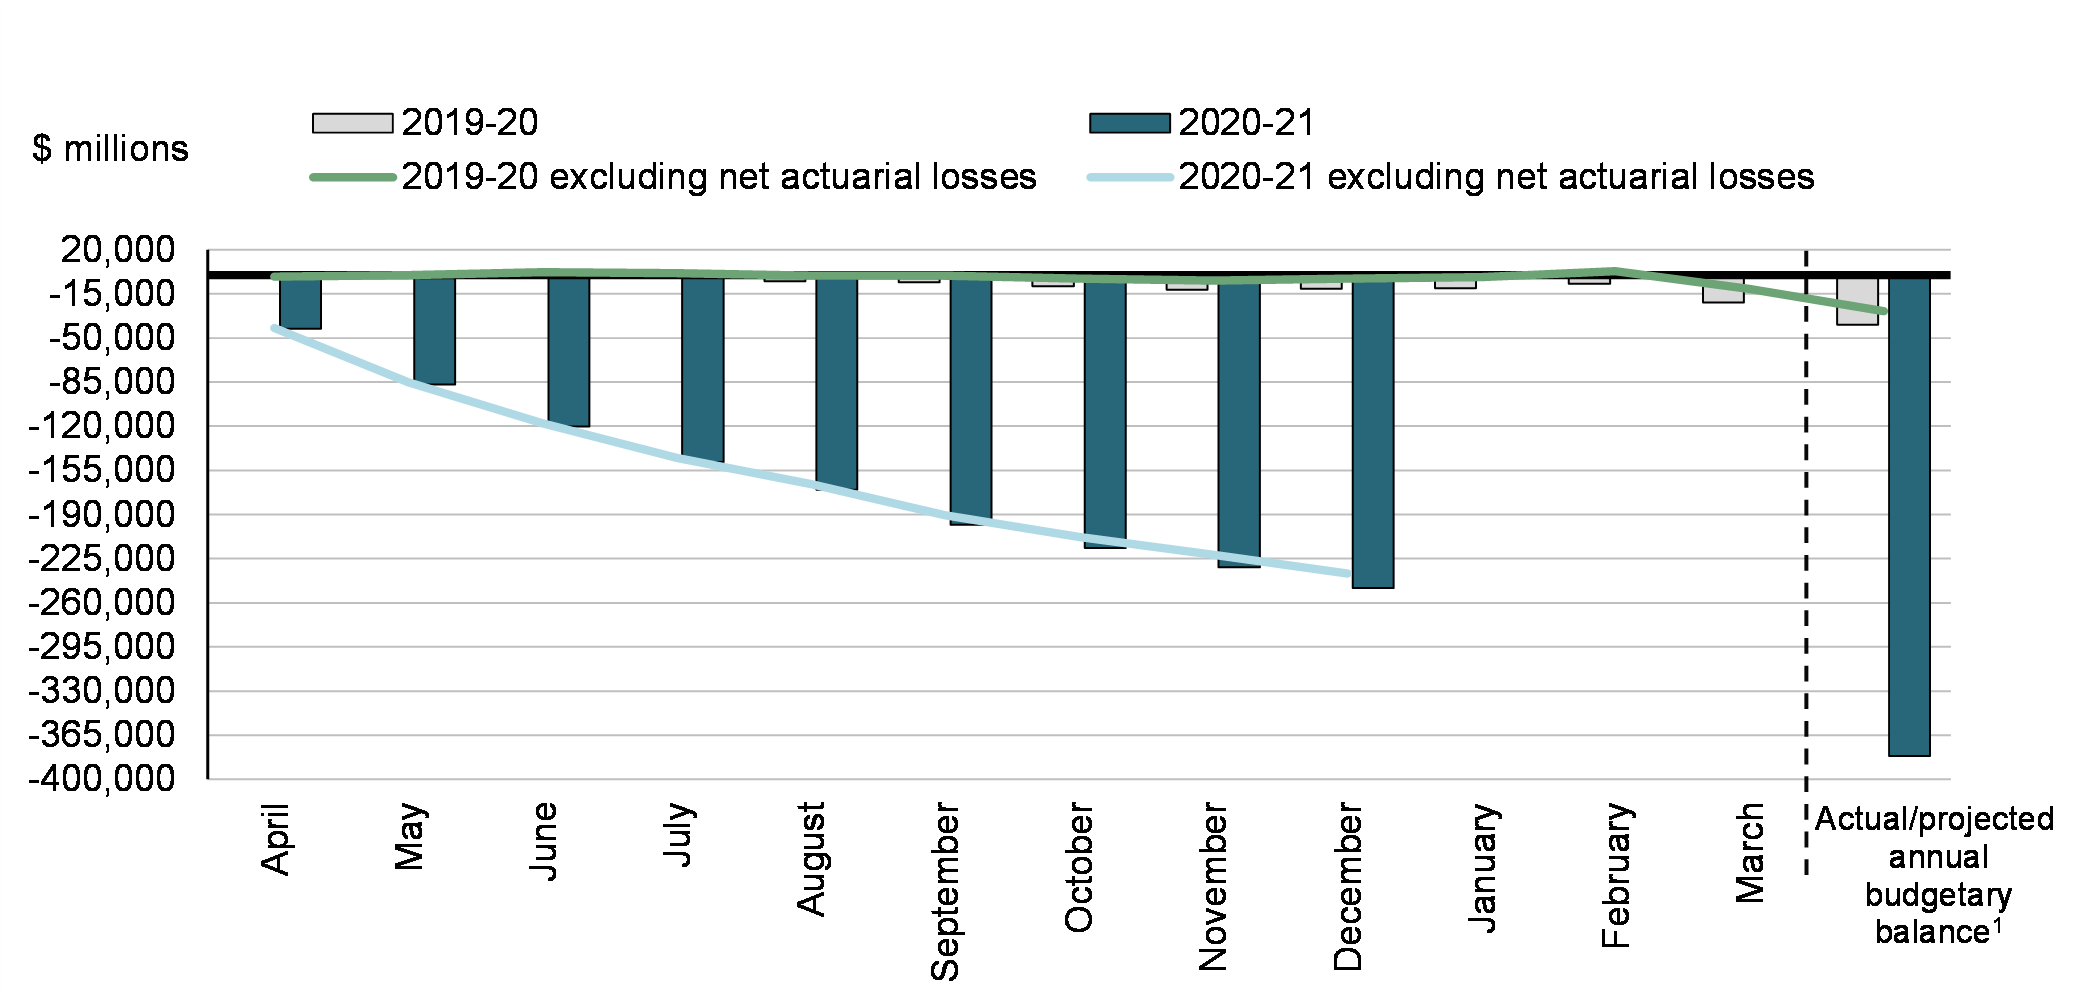 Chart 2: Year-to-Date Budgetary Balance and Budgetary Balance  Excluding Net Actuarial Losses